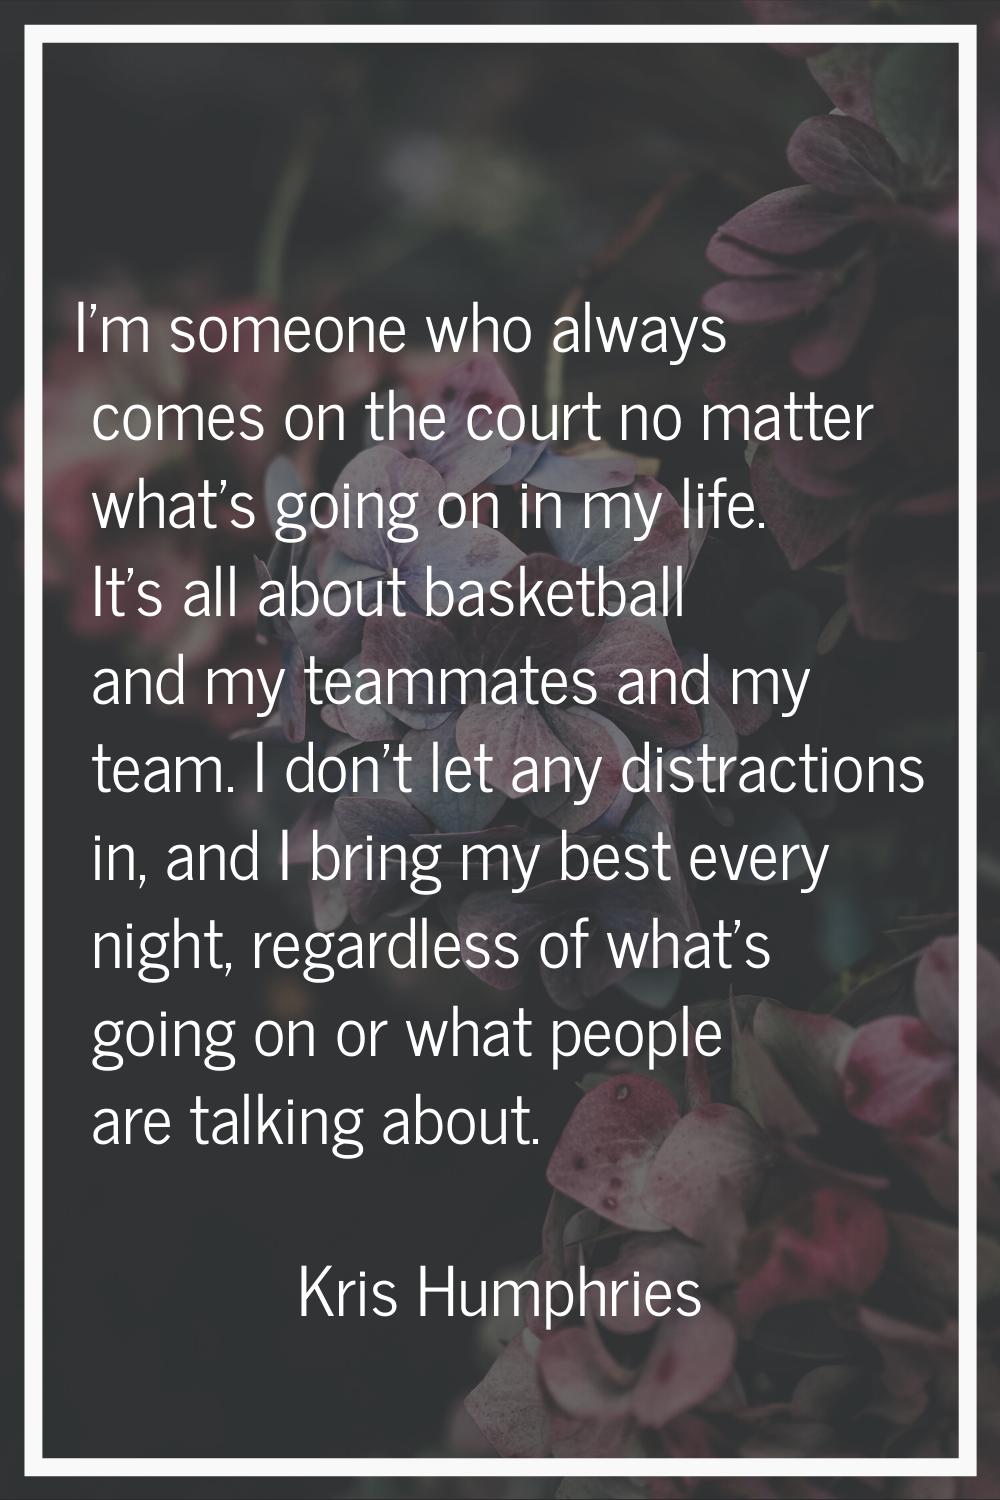 I'm someone who always comes on the court no matter what's going on in my life. It's all about bask